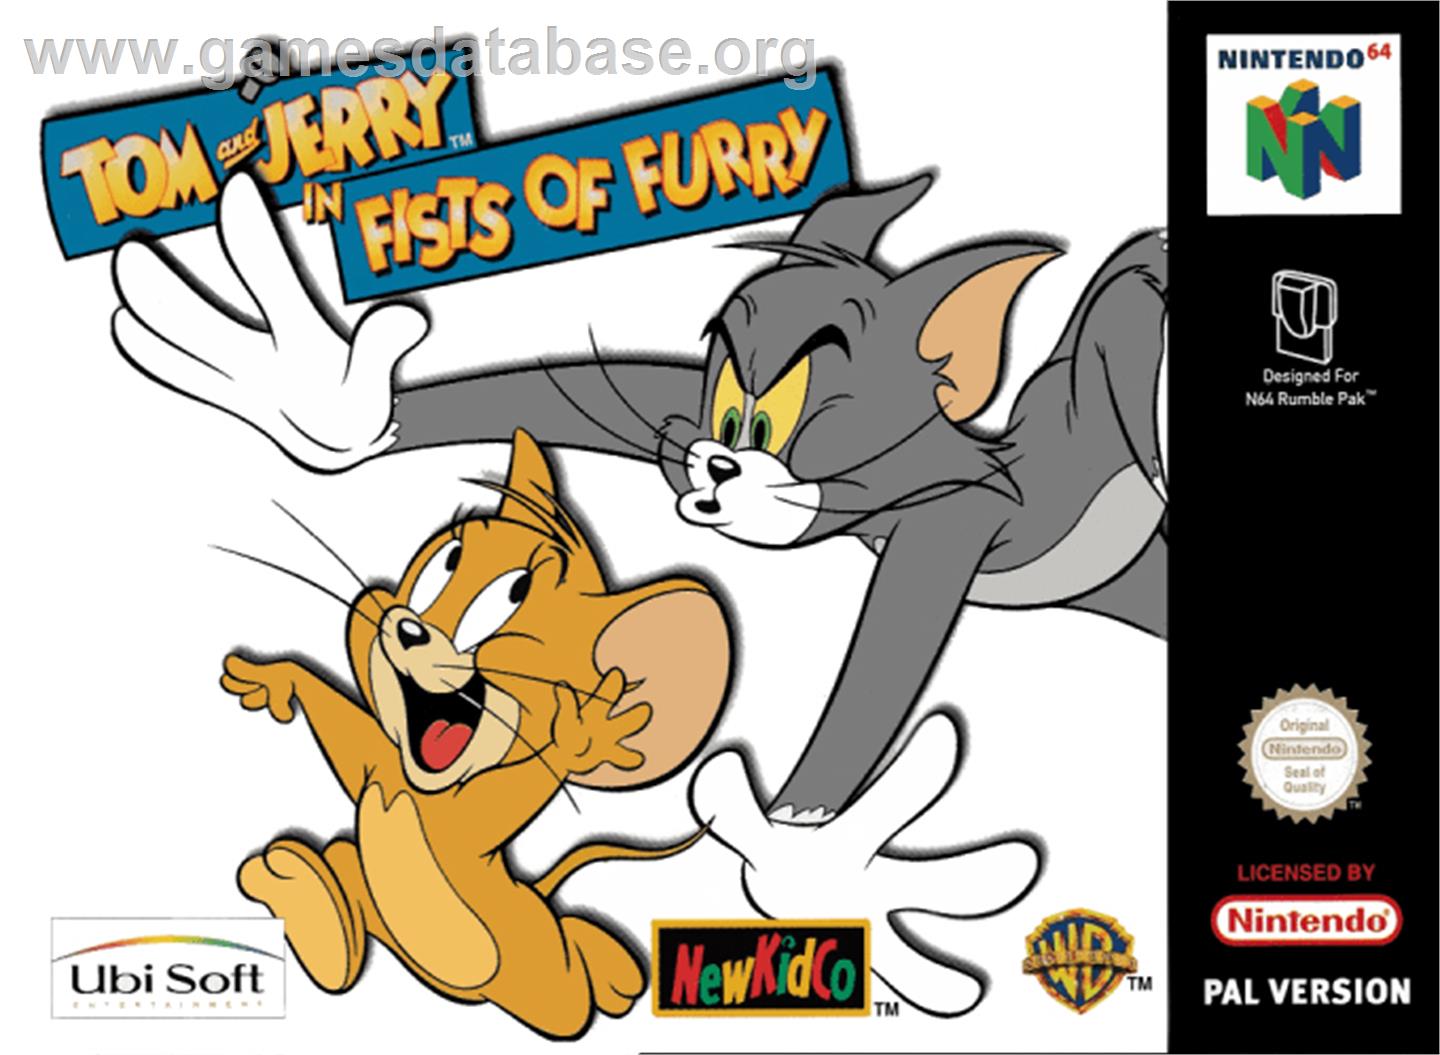 Tom and Jerry: Fists of Furry - Nintendo N64 - Artwork - Box